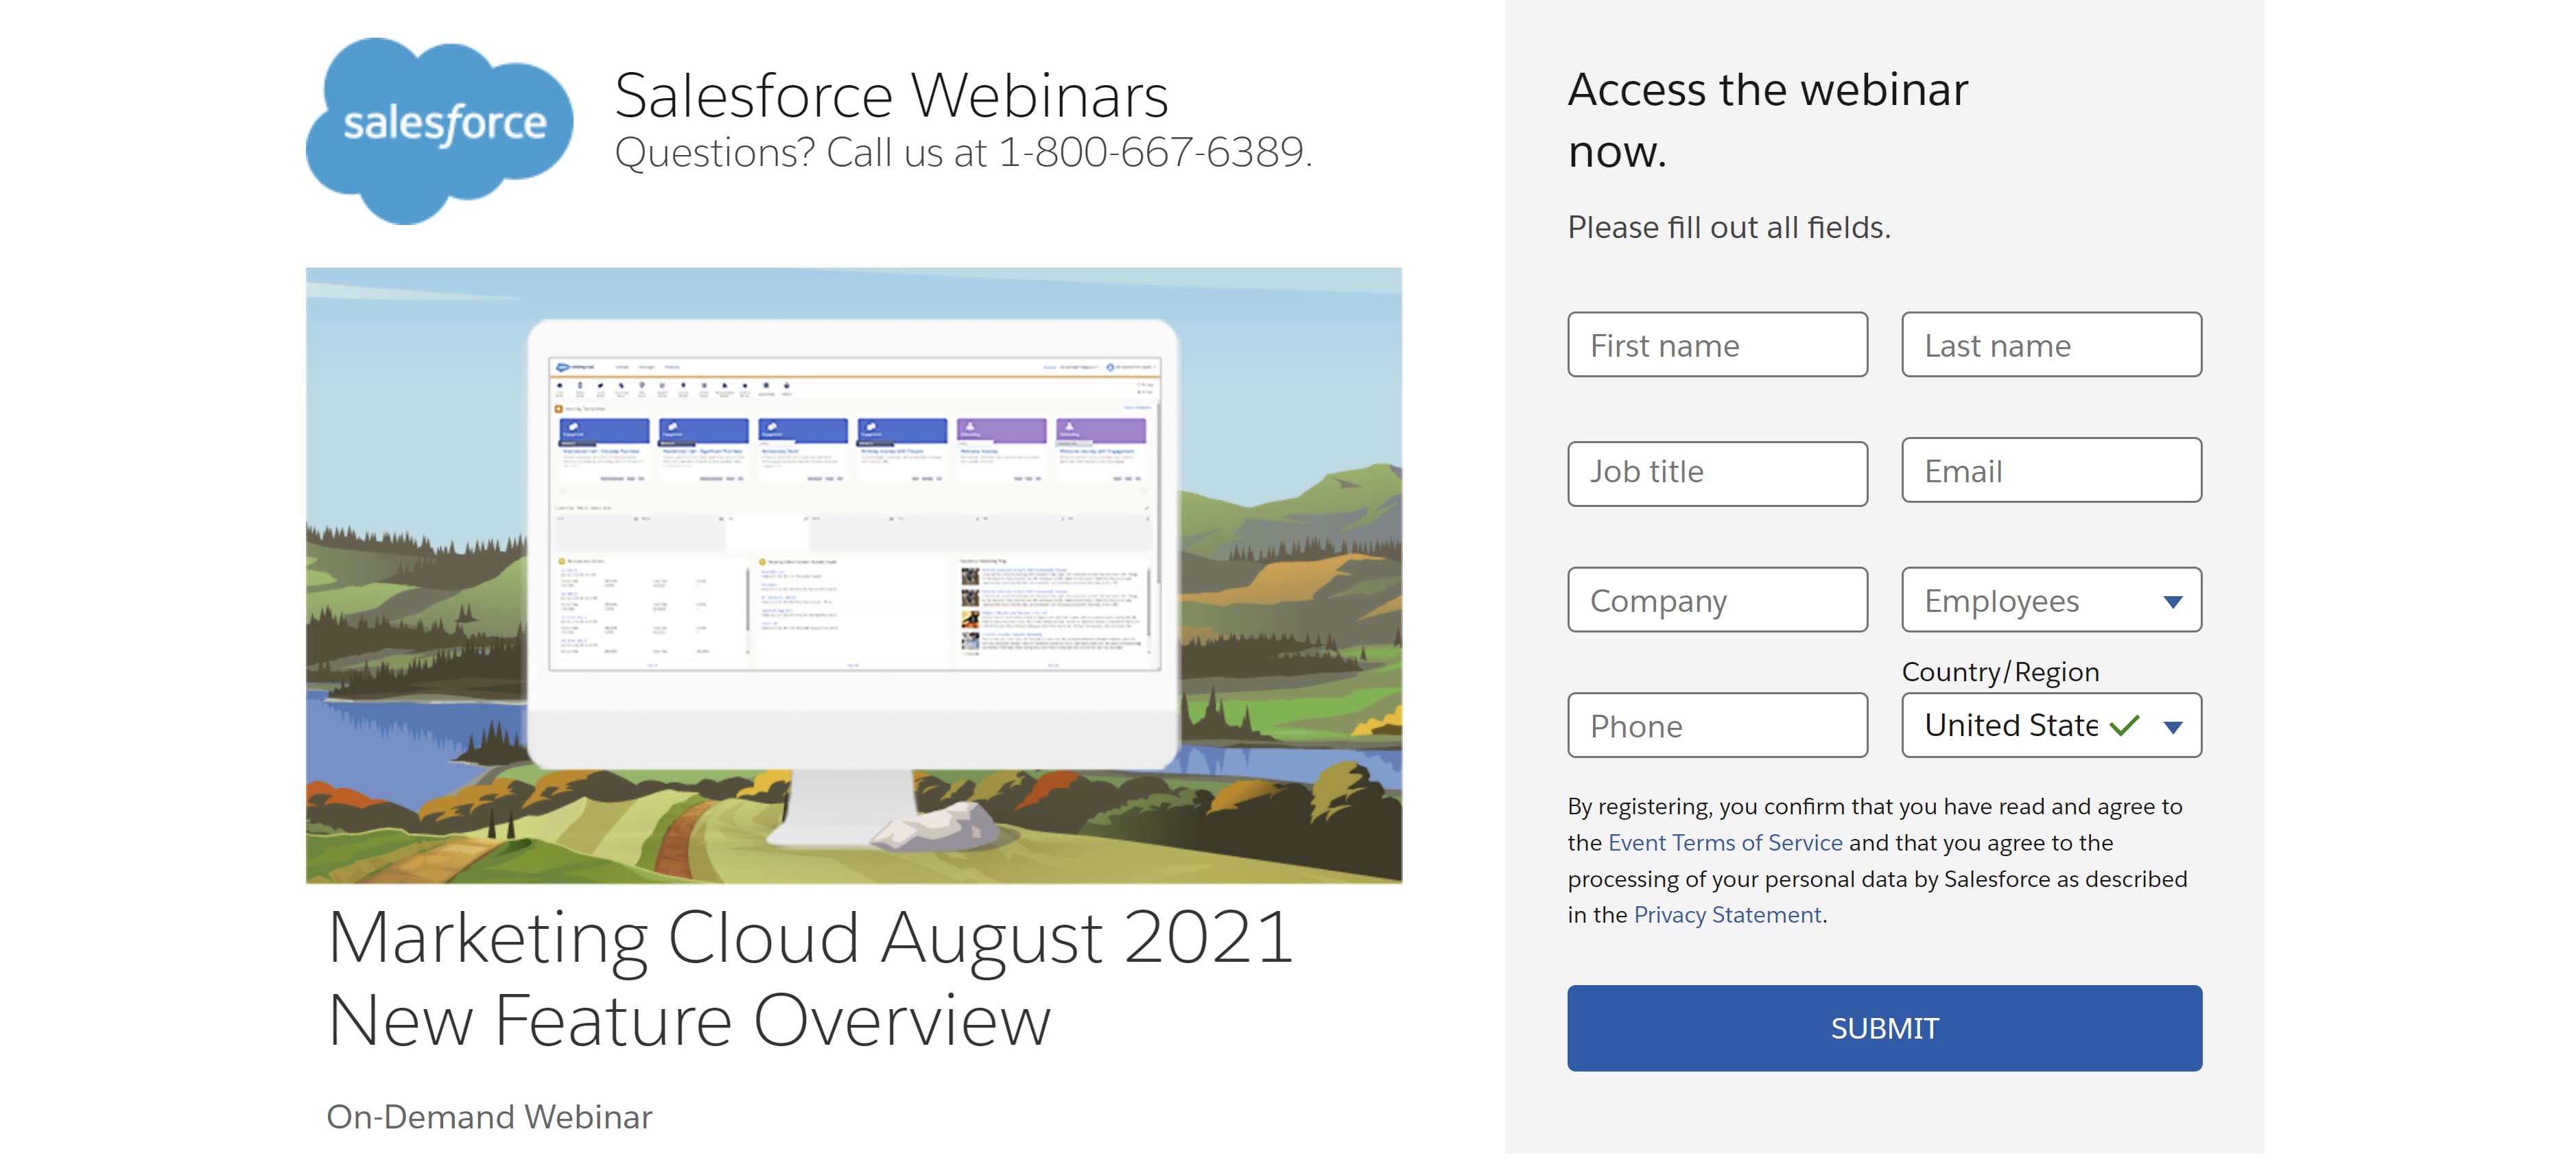 Example landing page for the Salesforce webinar